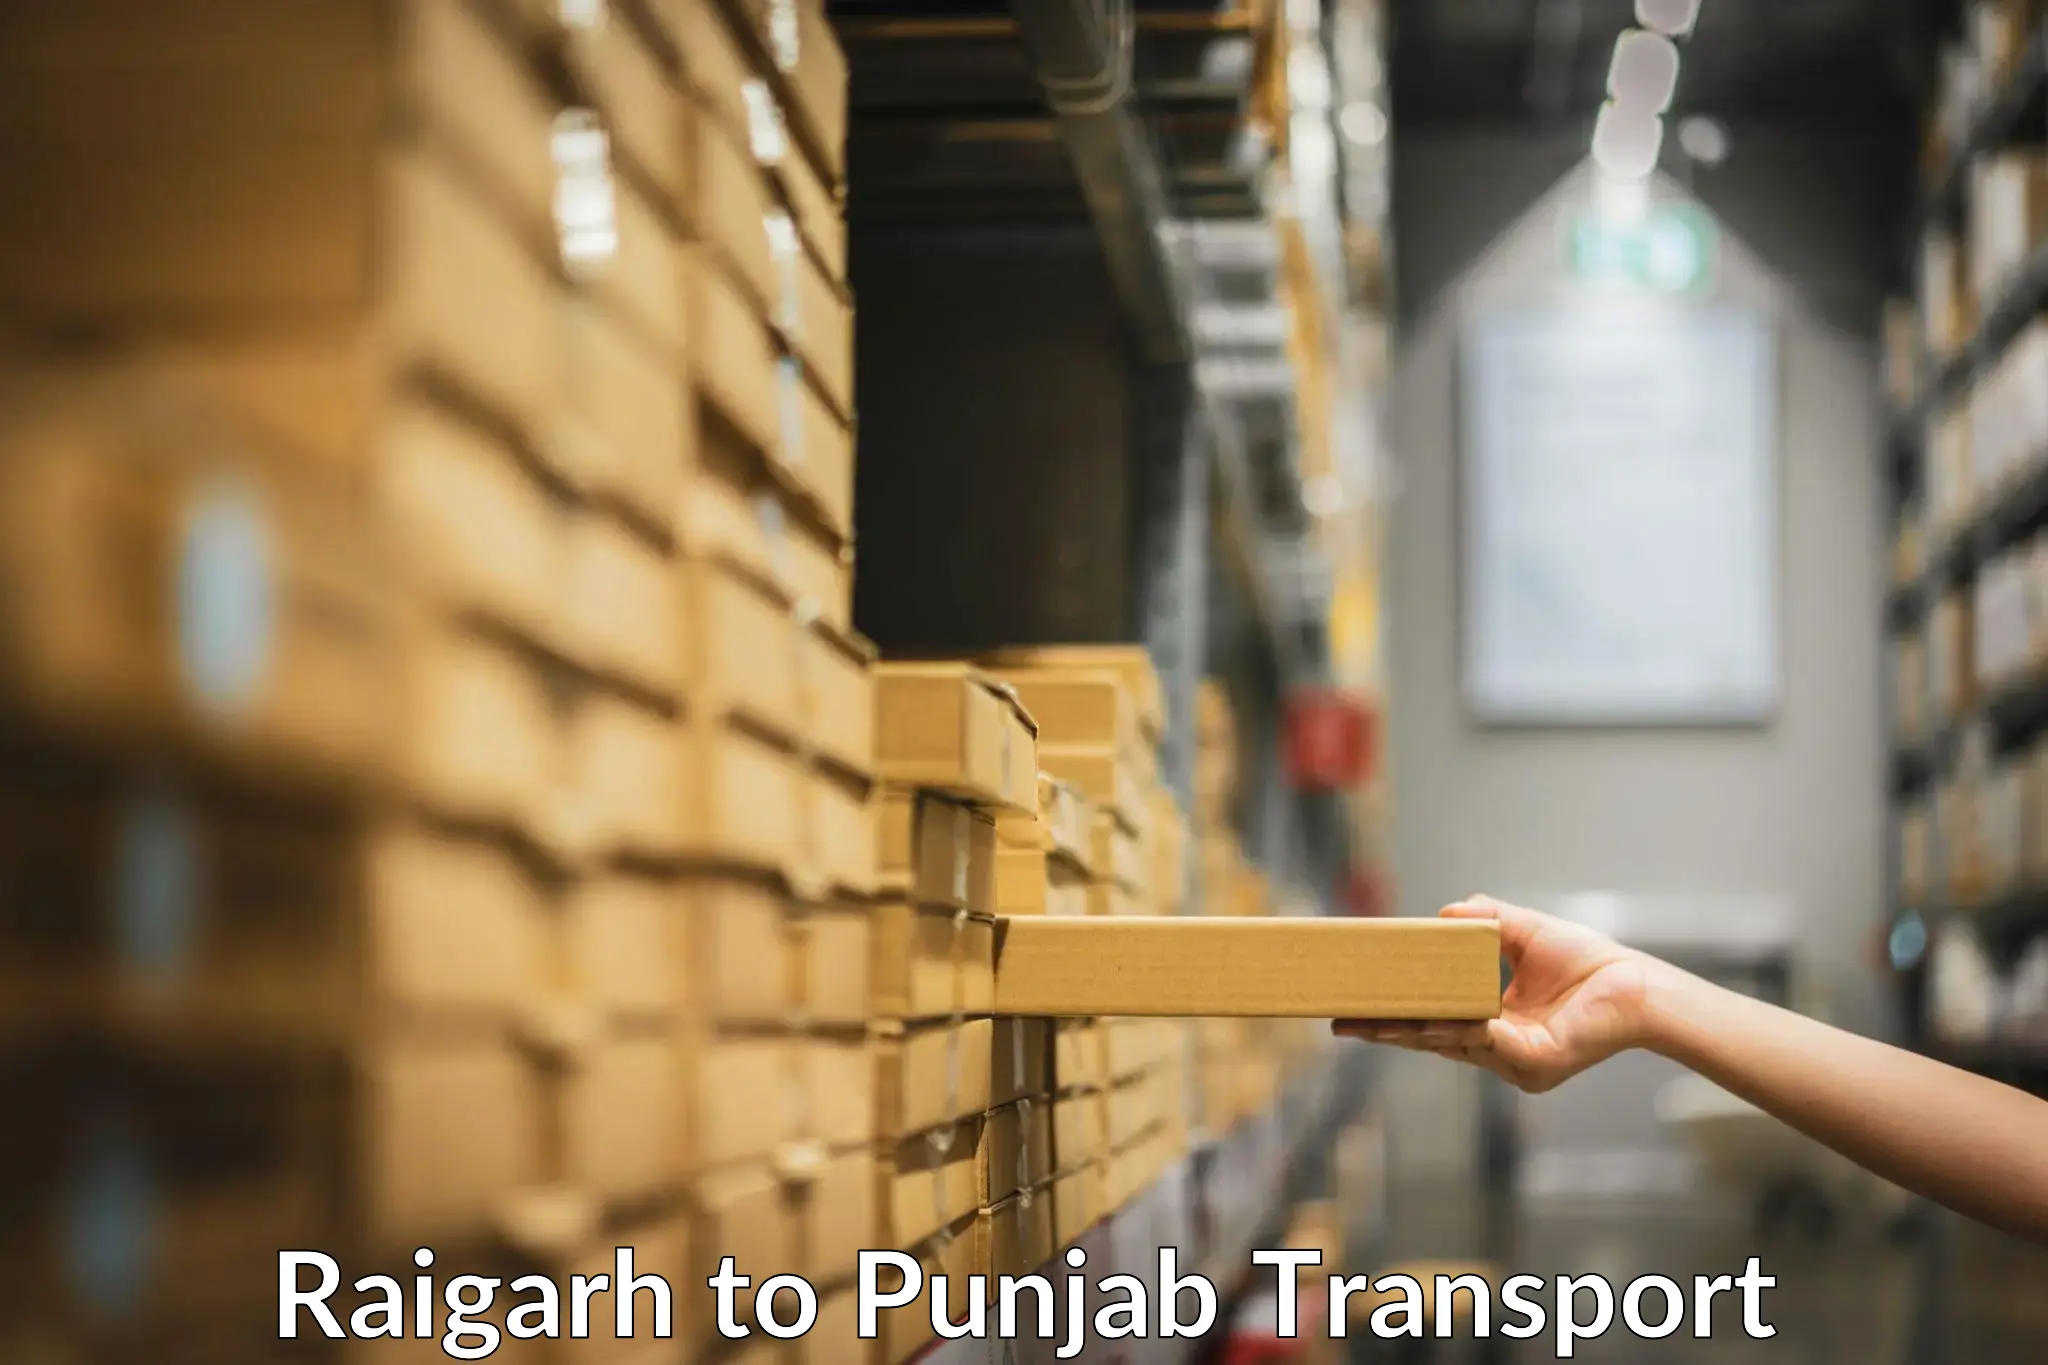 Daily parcel service transport in Raigarh to Zirakpur